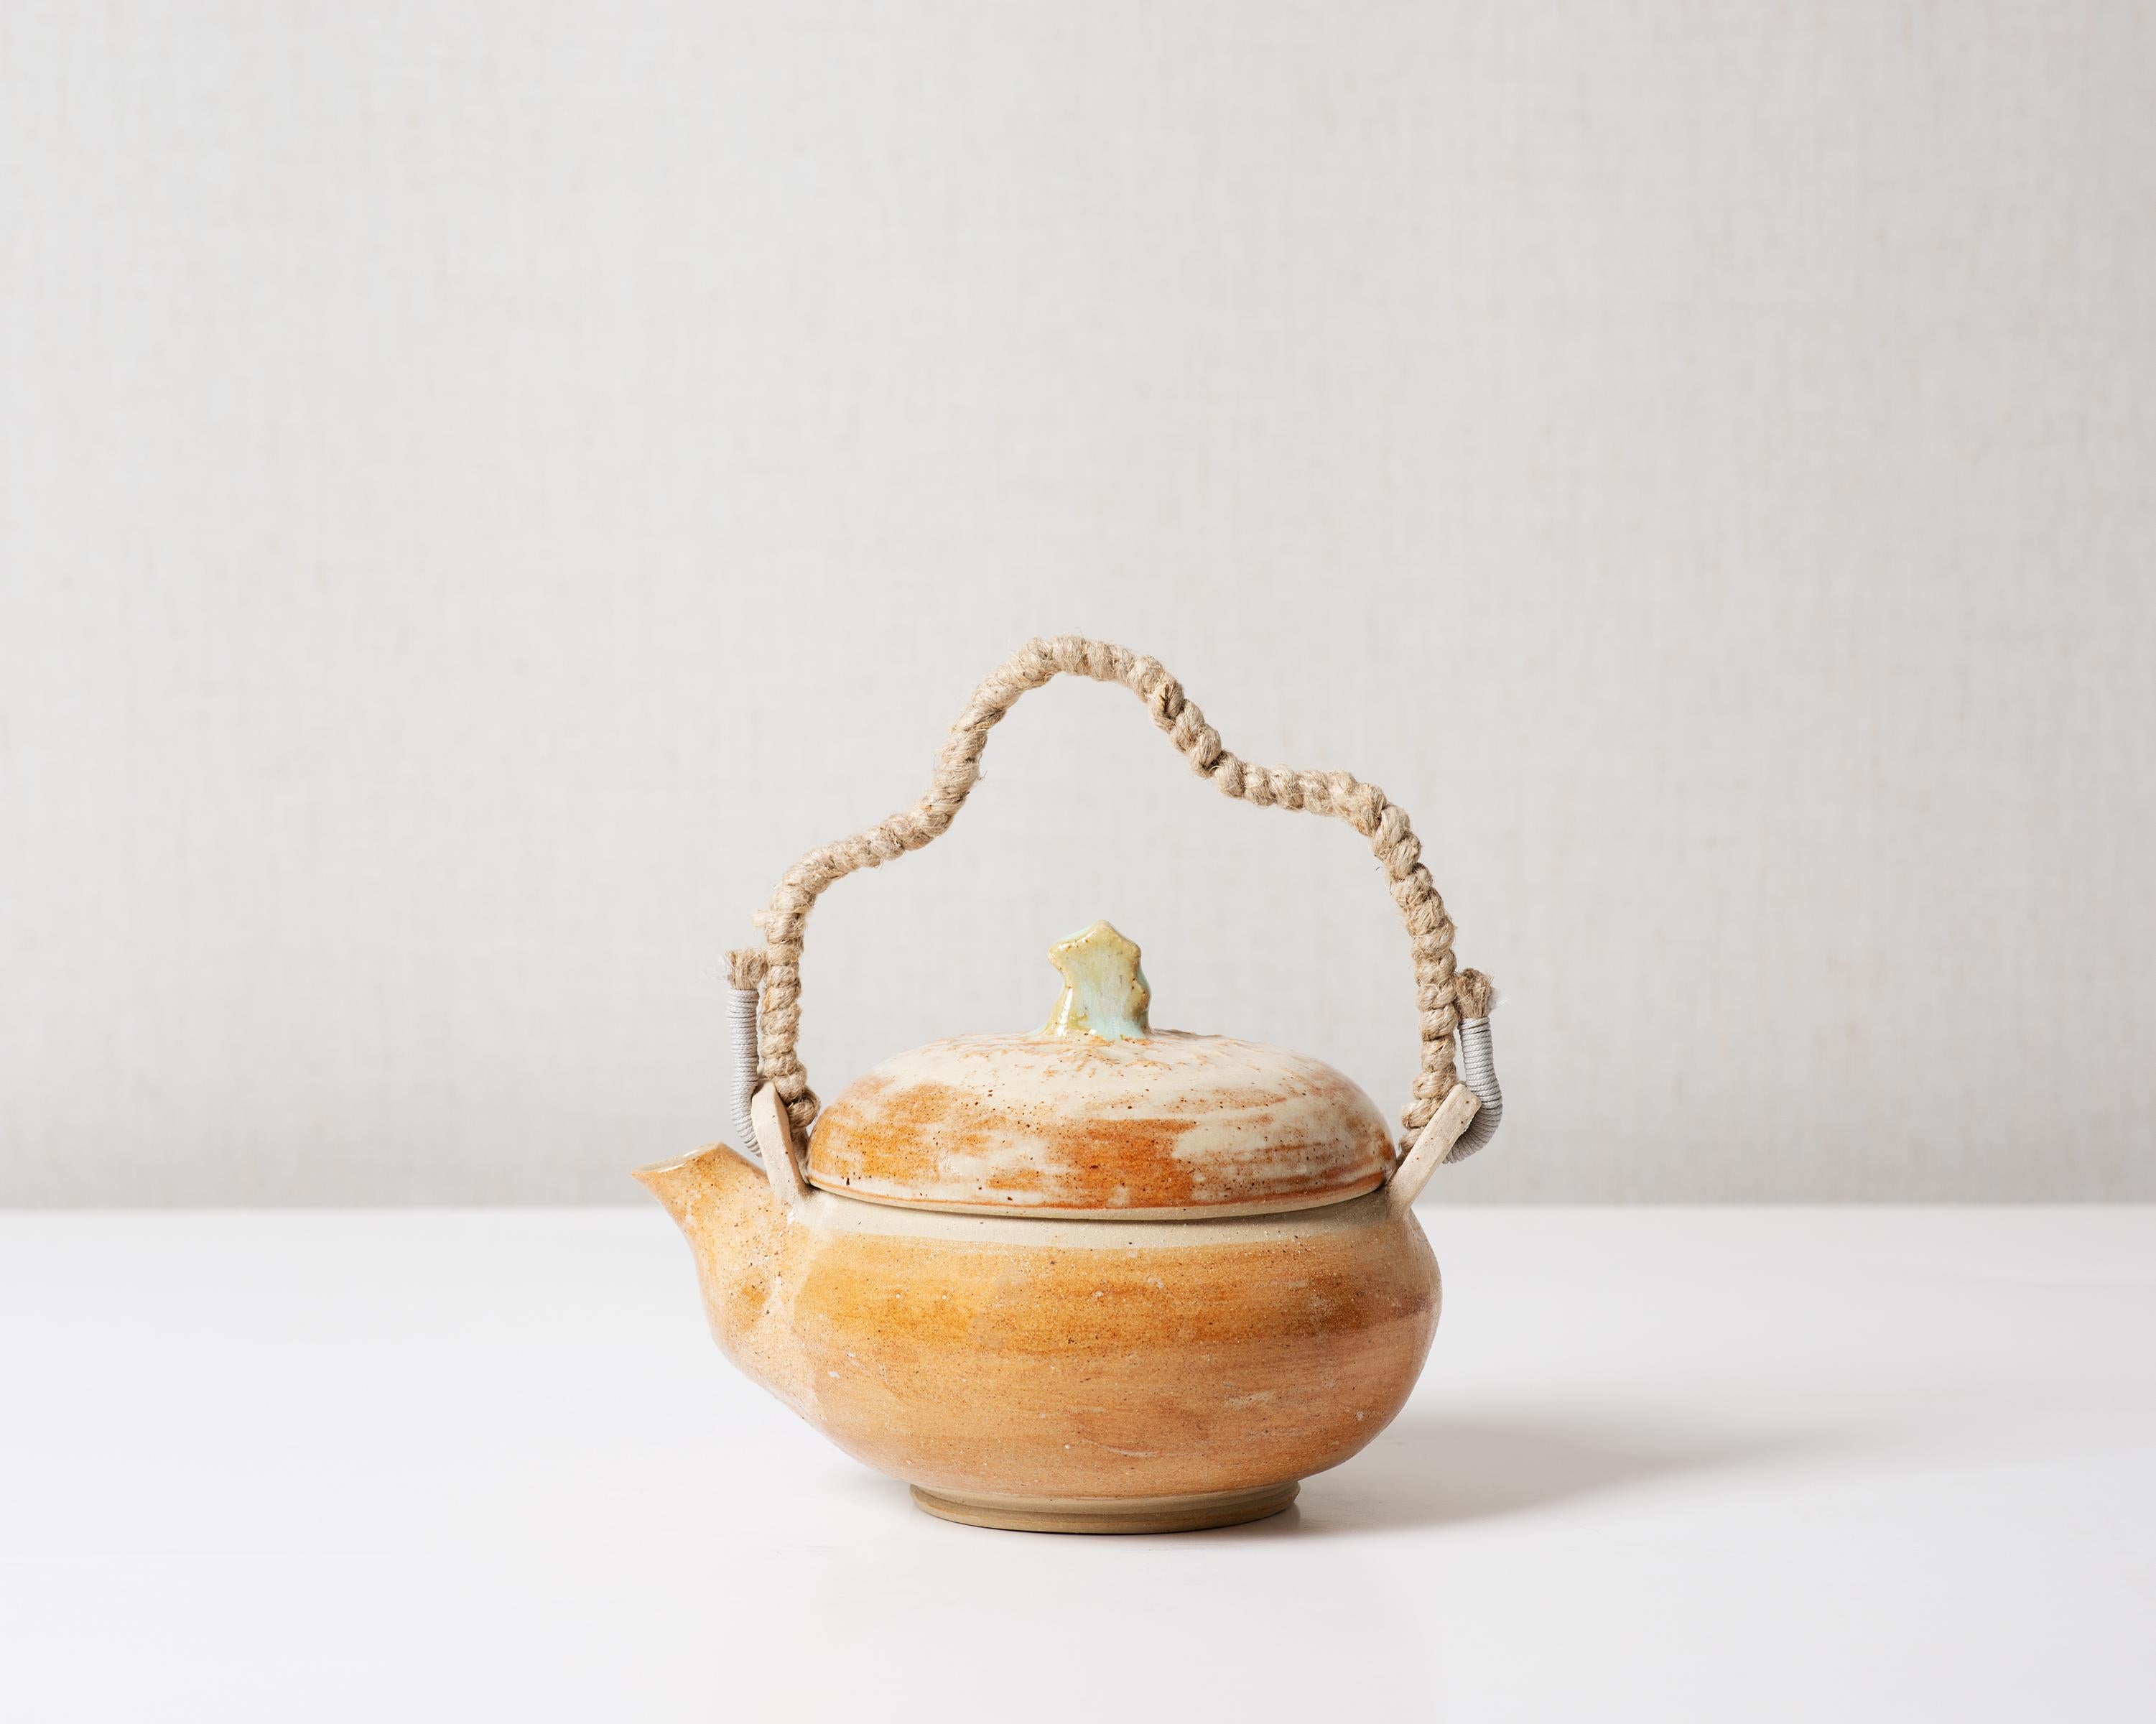 Wheel thrown Teapot
Curvy Rope handle «acorn»

Beige Clay with Creamy-Tan and Pastel Green + Sheer Glaze
Ø 13 cm H: 17,5 cm

Unique piece made in Belgium - 2021